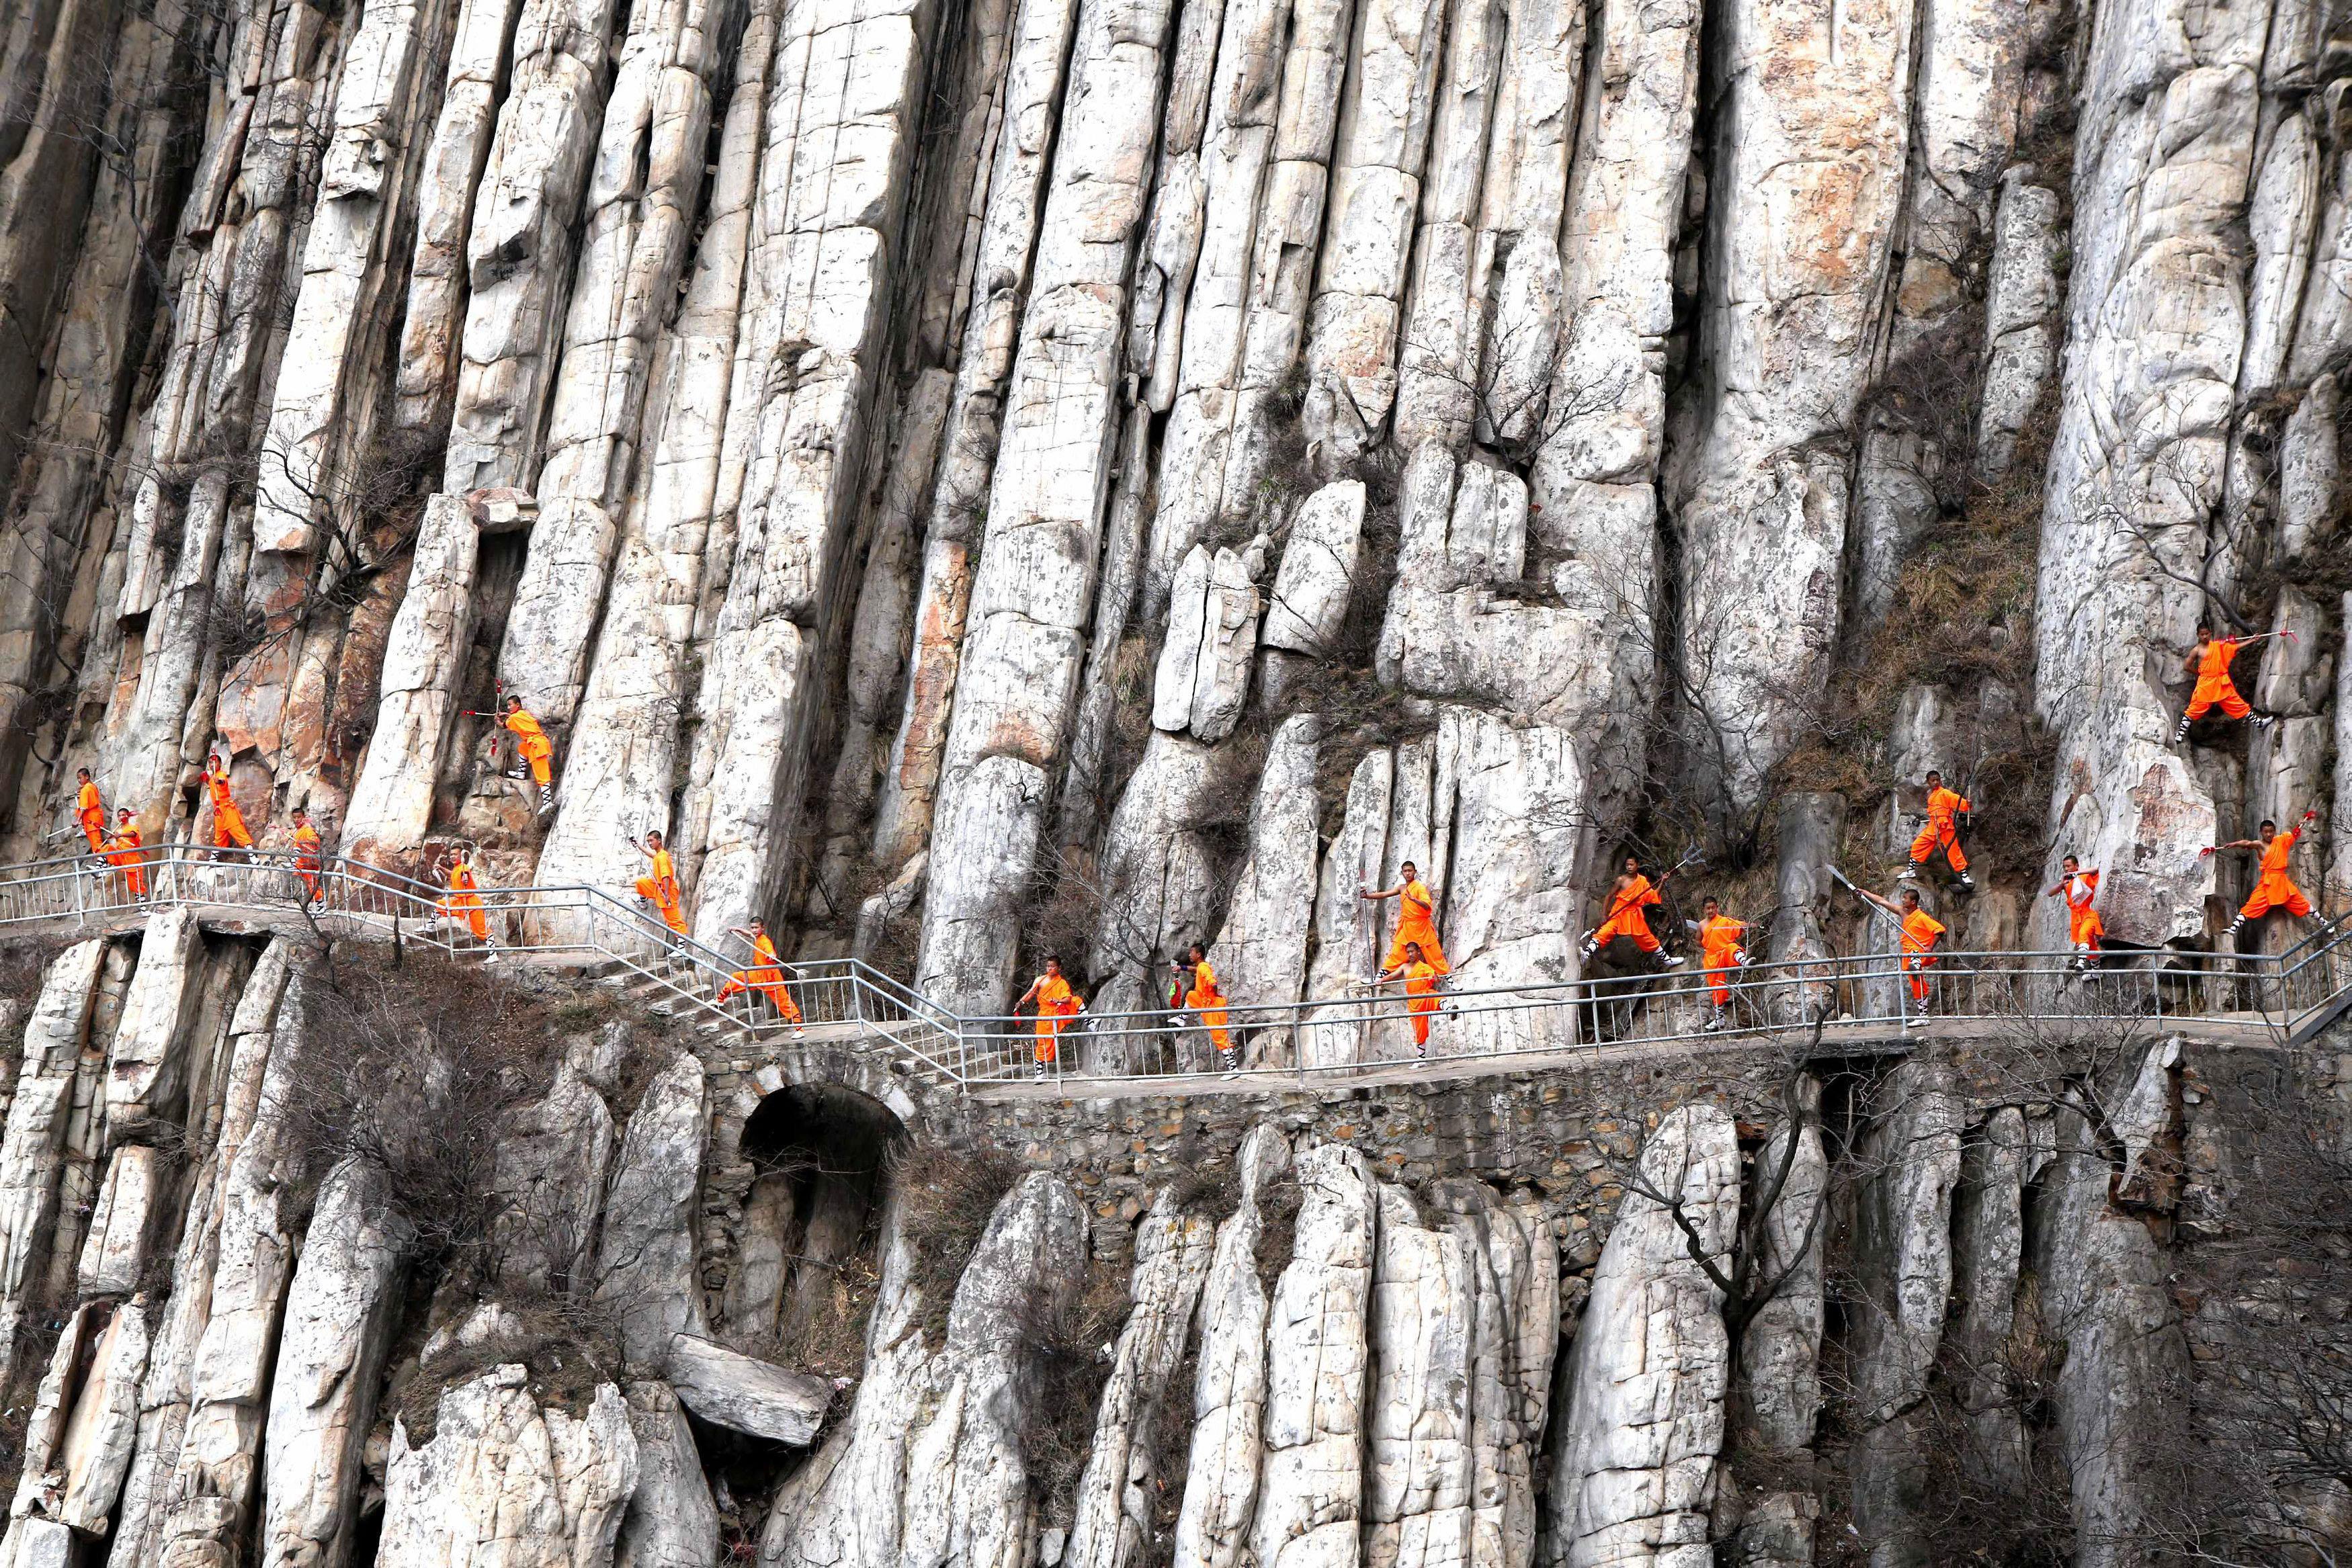 Students from a martial arts school practice Shaolin Kung Fu on cliffs in Dengfeng